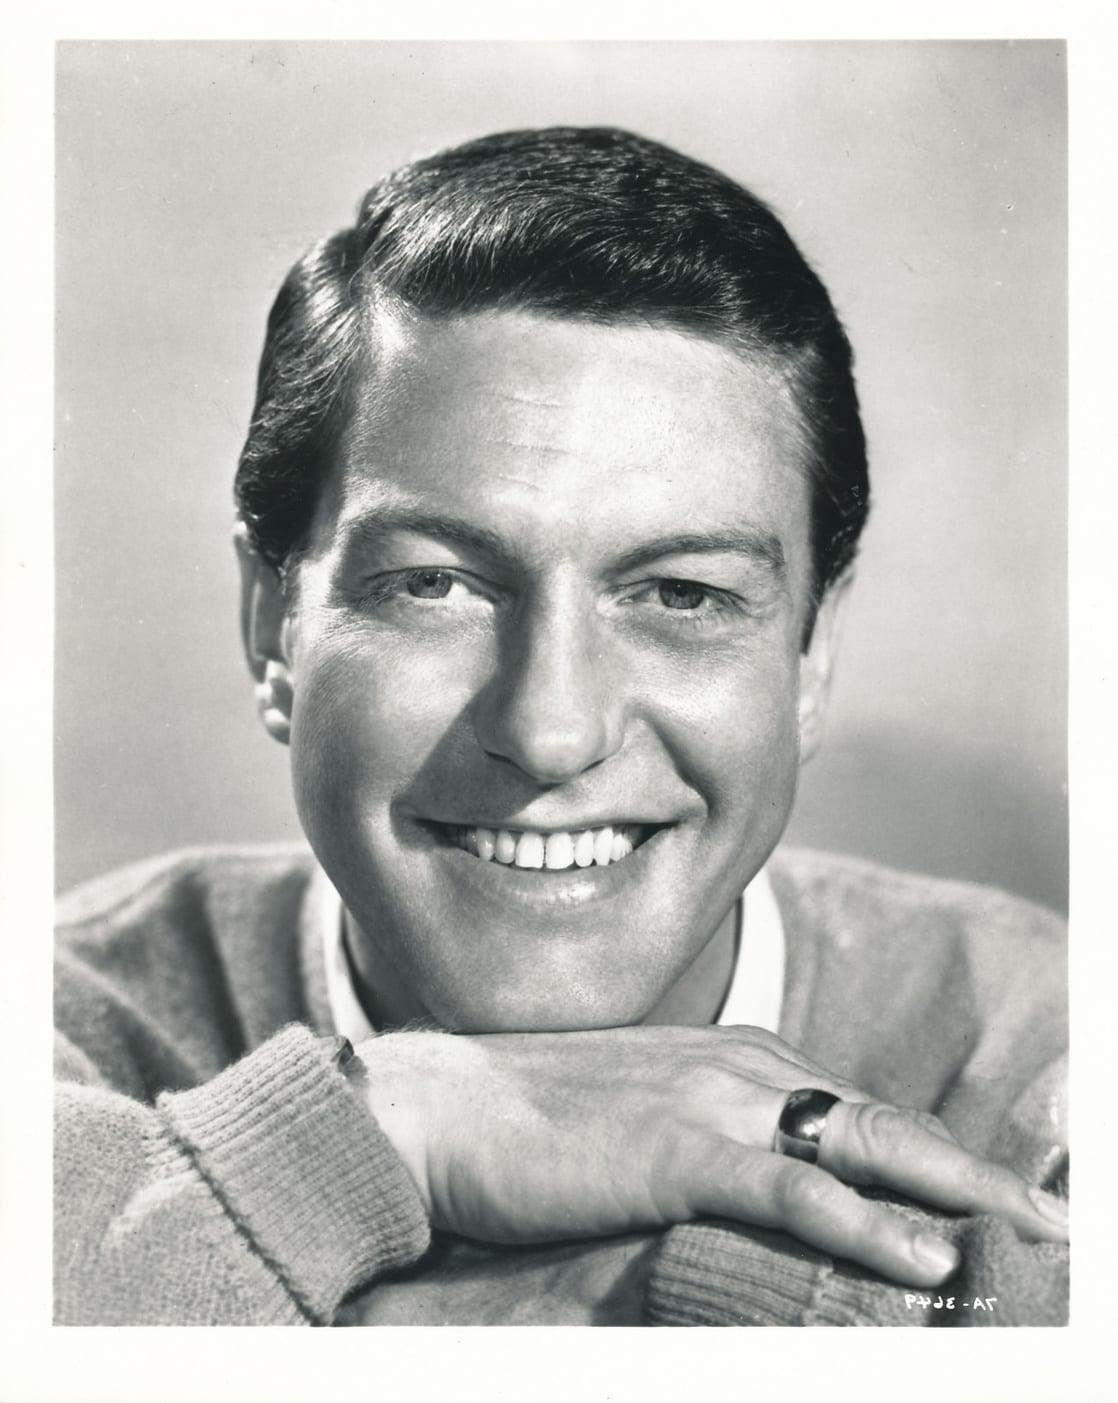 A picture of dick van dyke